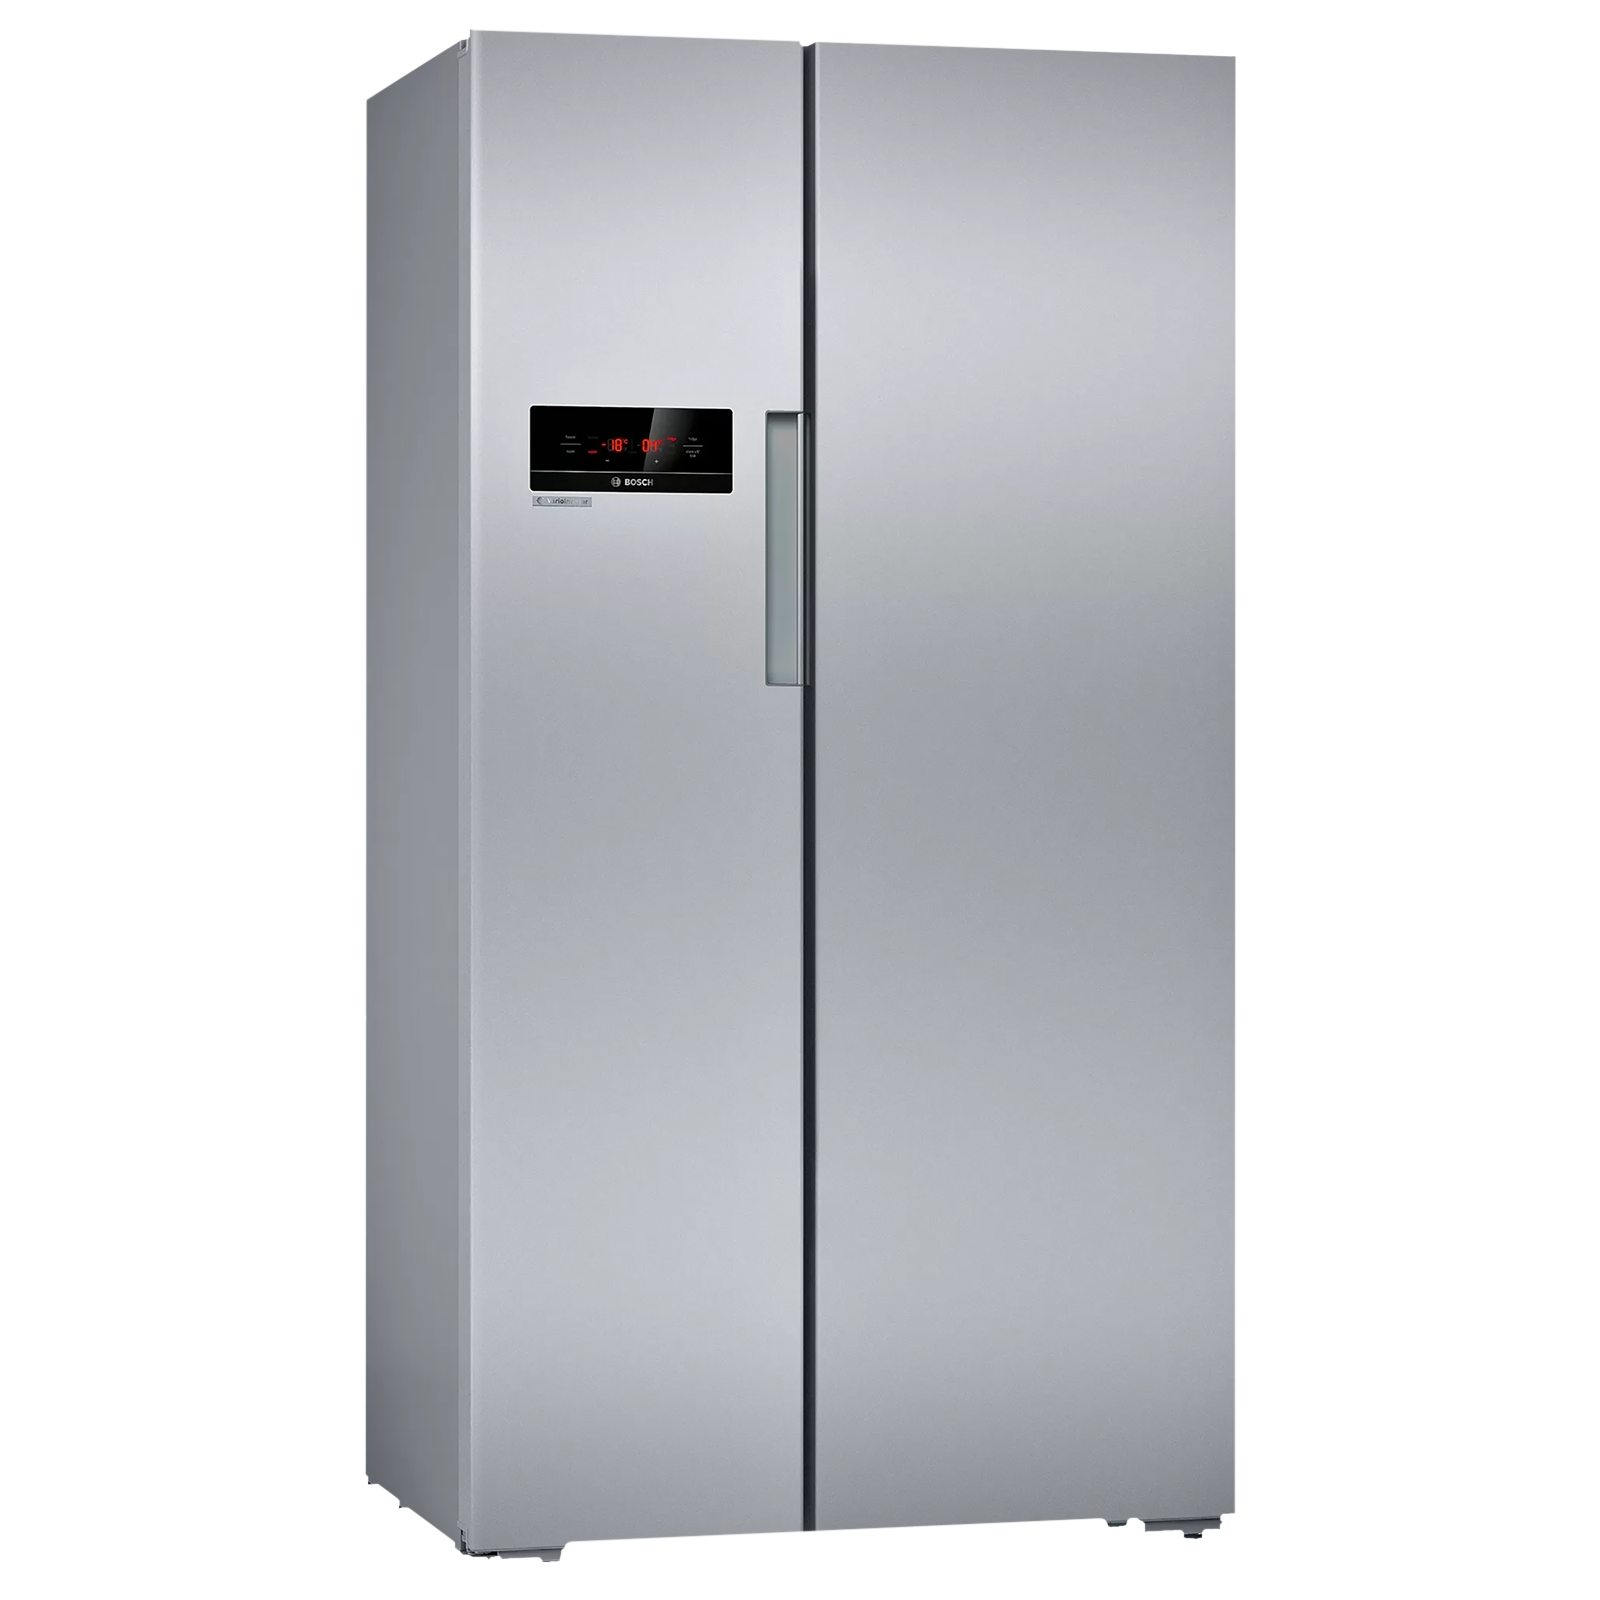 Bosch Series 2 658 Litres 2 Star Frost Free Side by Side Refrigerator with Temperature Display (KAN92VS30I, Silver)_1